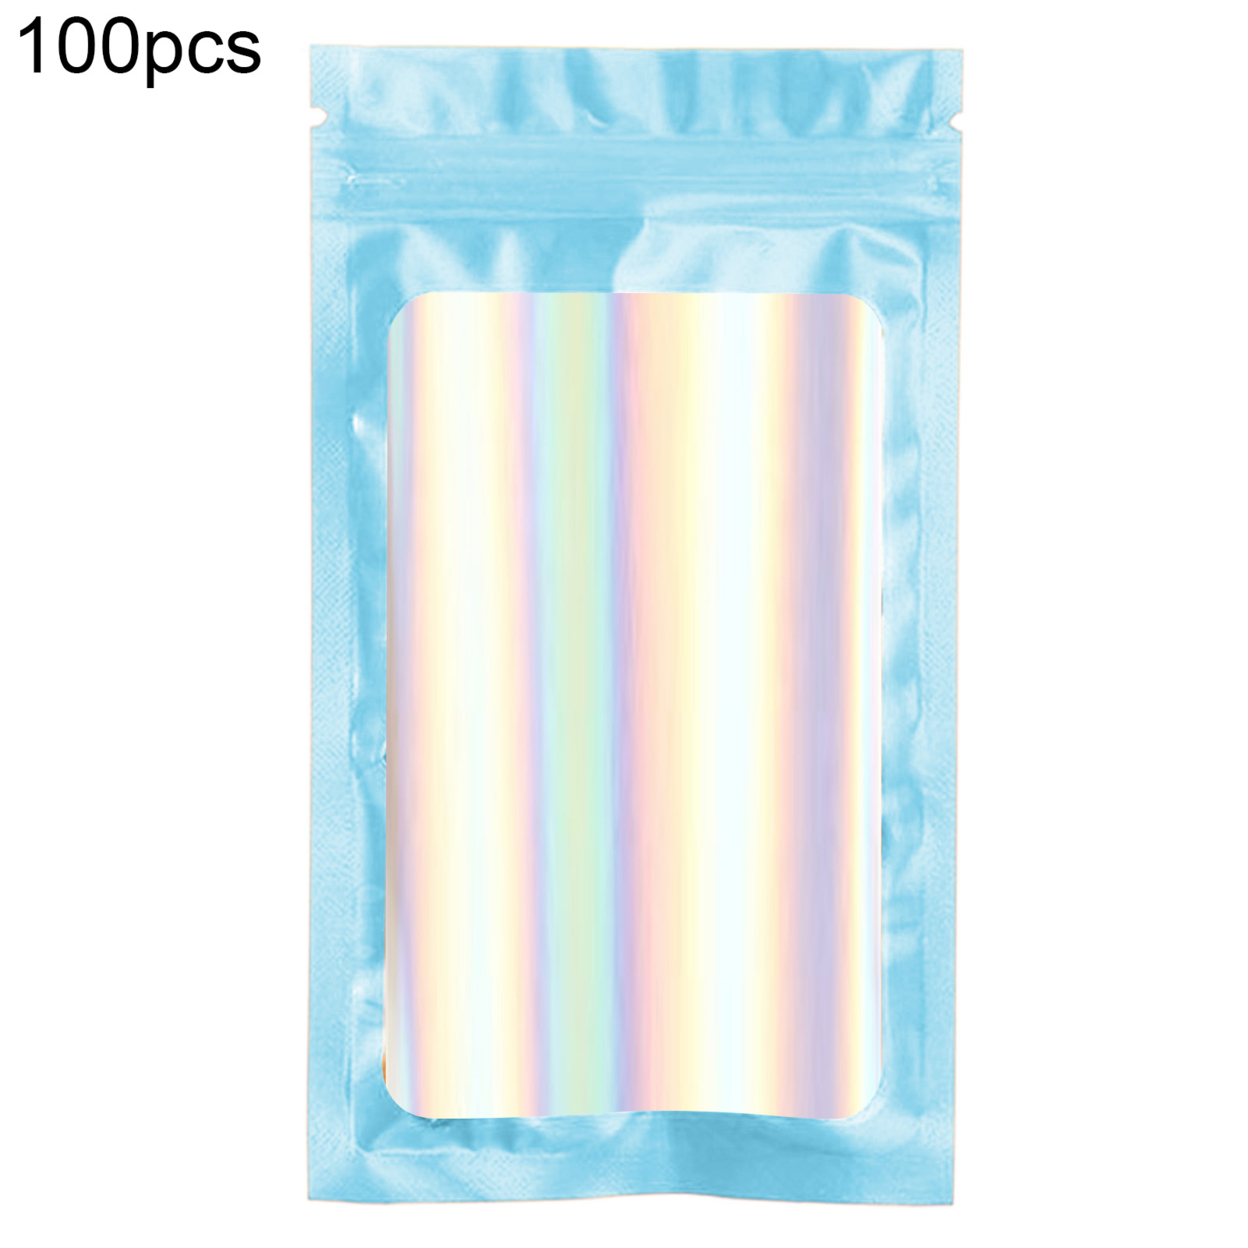 100Pcs Set Zip-lock Bags Eye-catching Odor Proof Holographic Color Cosmetic Laser Packaging Bags for Kitchen - blue, 14*20cm